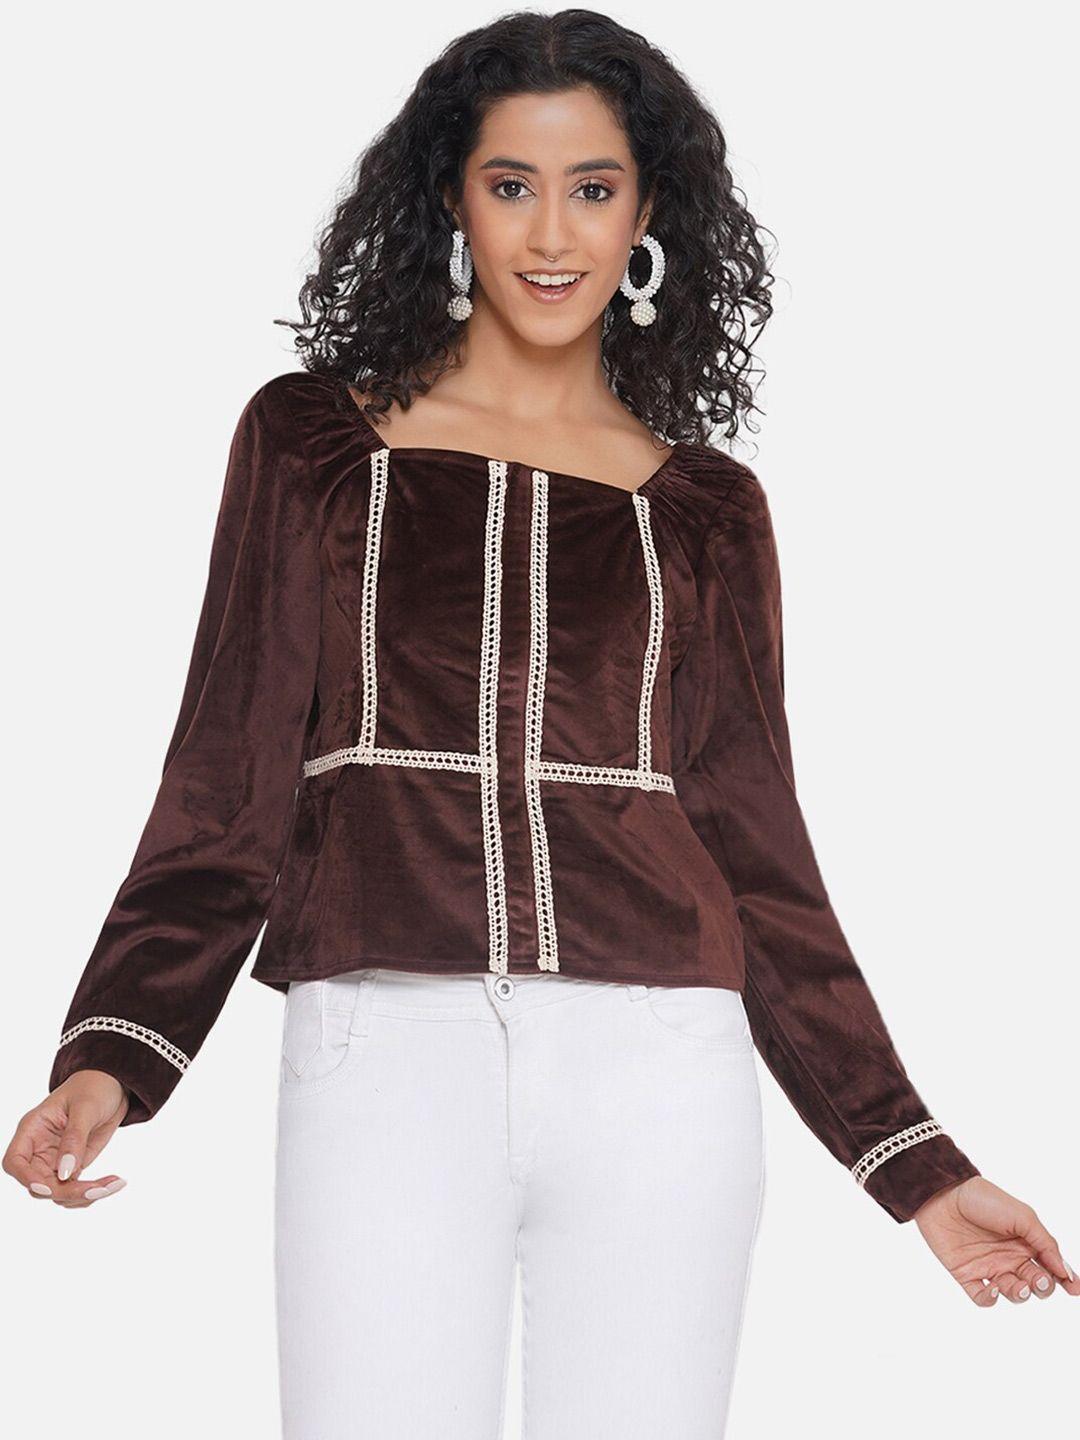 bellamia-square-neck-puff-sleeves-top